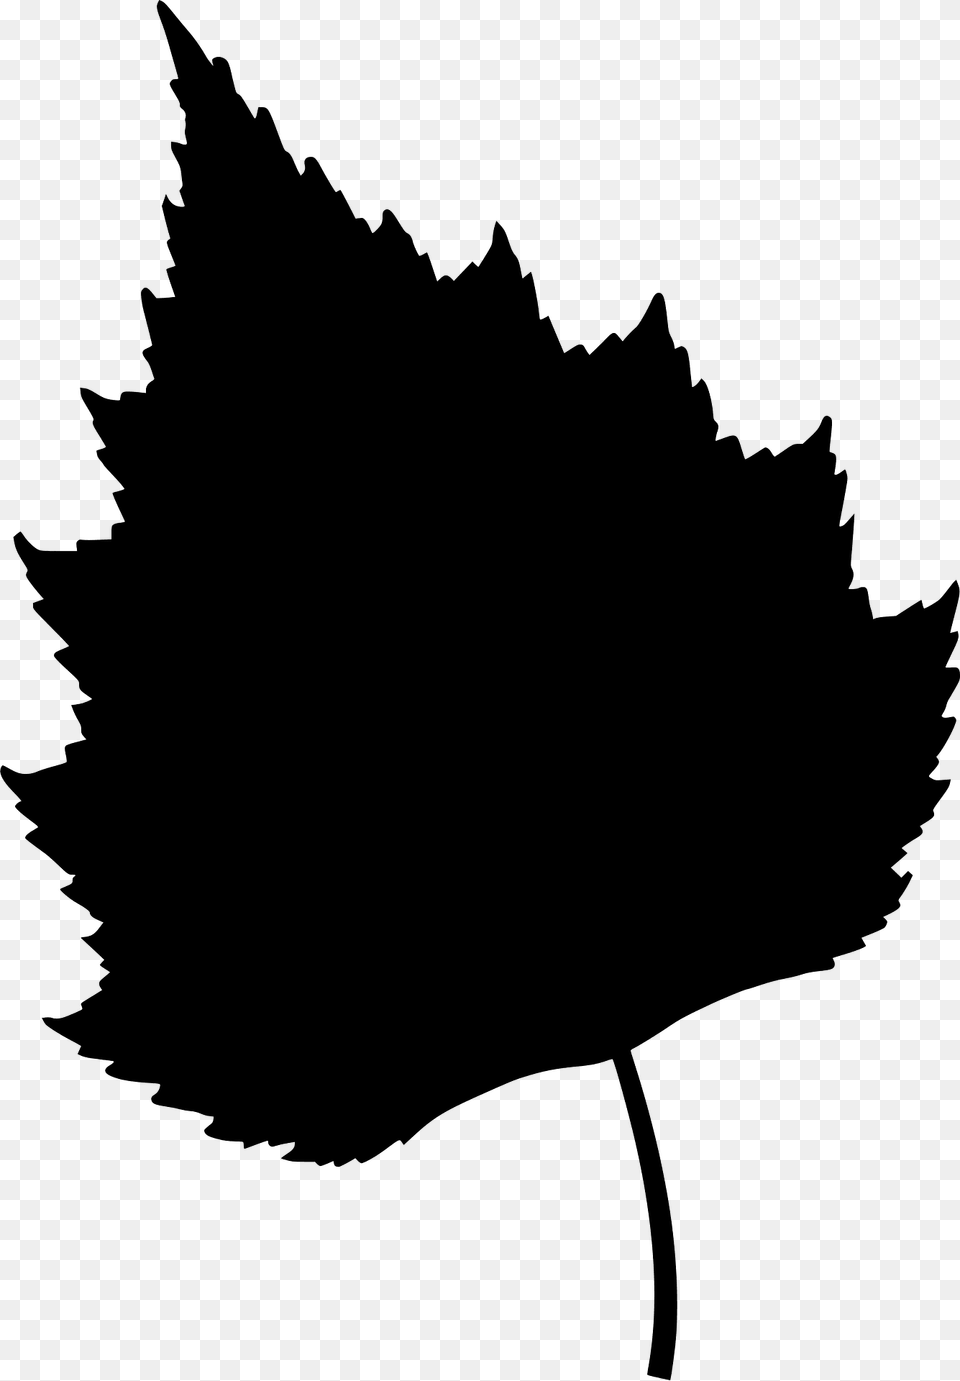 Silver Birch Leaf Silhouette, Plant, Tree, Maple Leaf, Animal Png Image